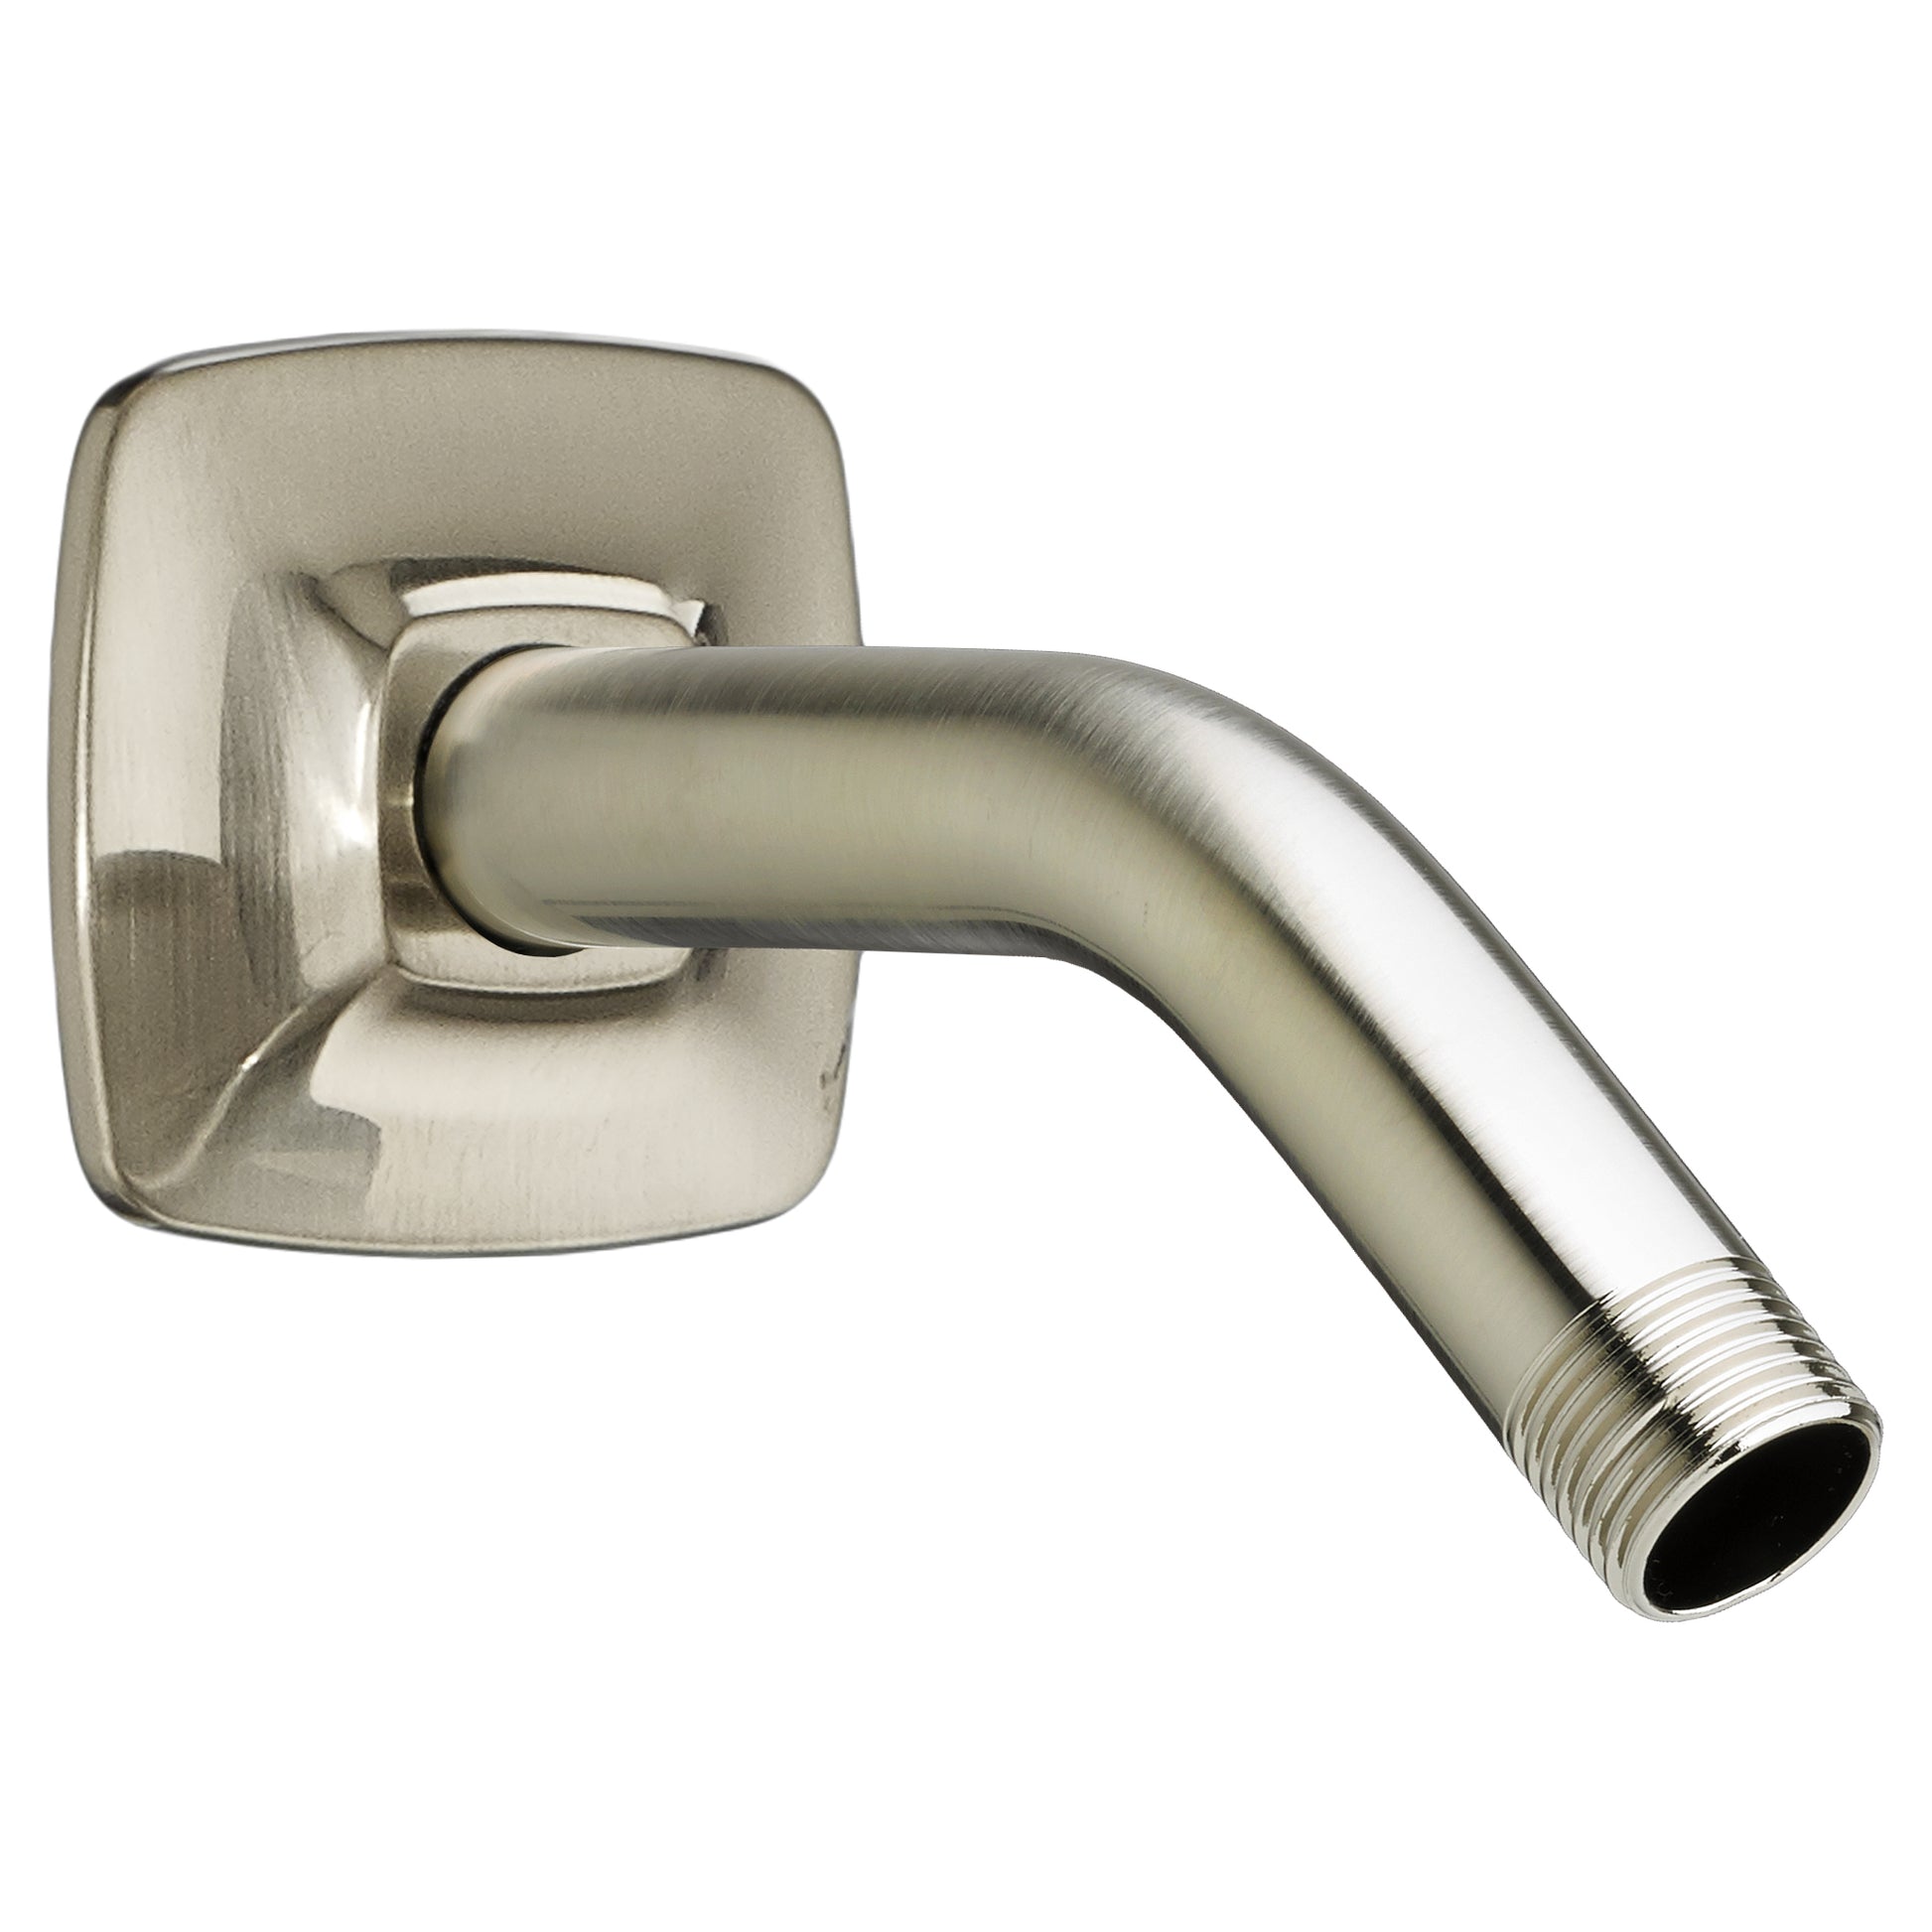 AMERICAN-STANDARD 1660245.295, Townsend Showerhead Arm and Flange in Brushed Nickel